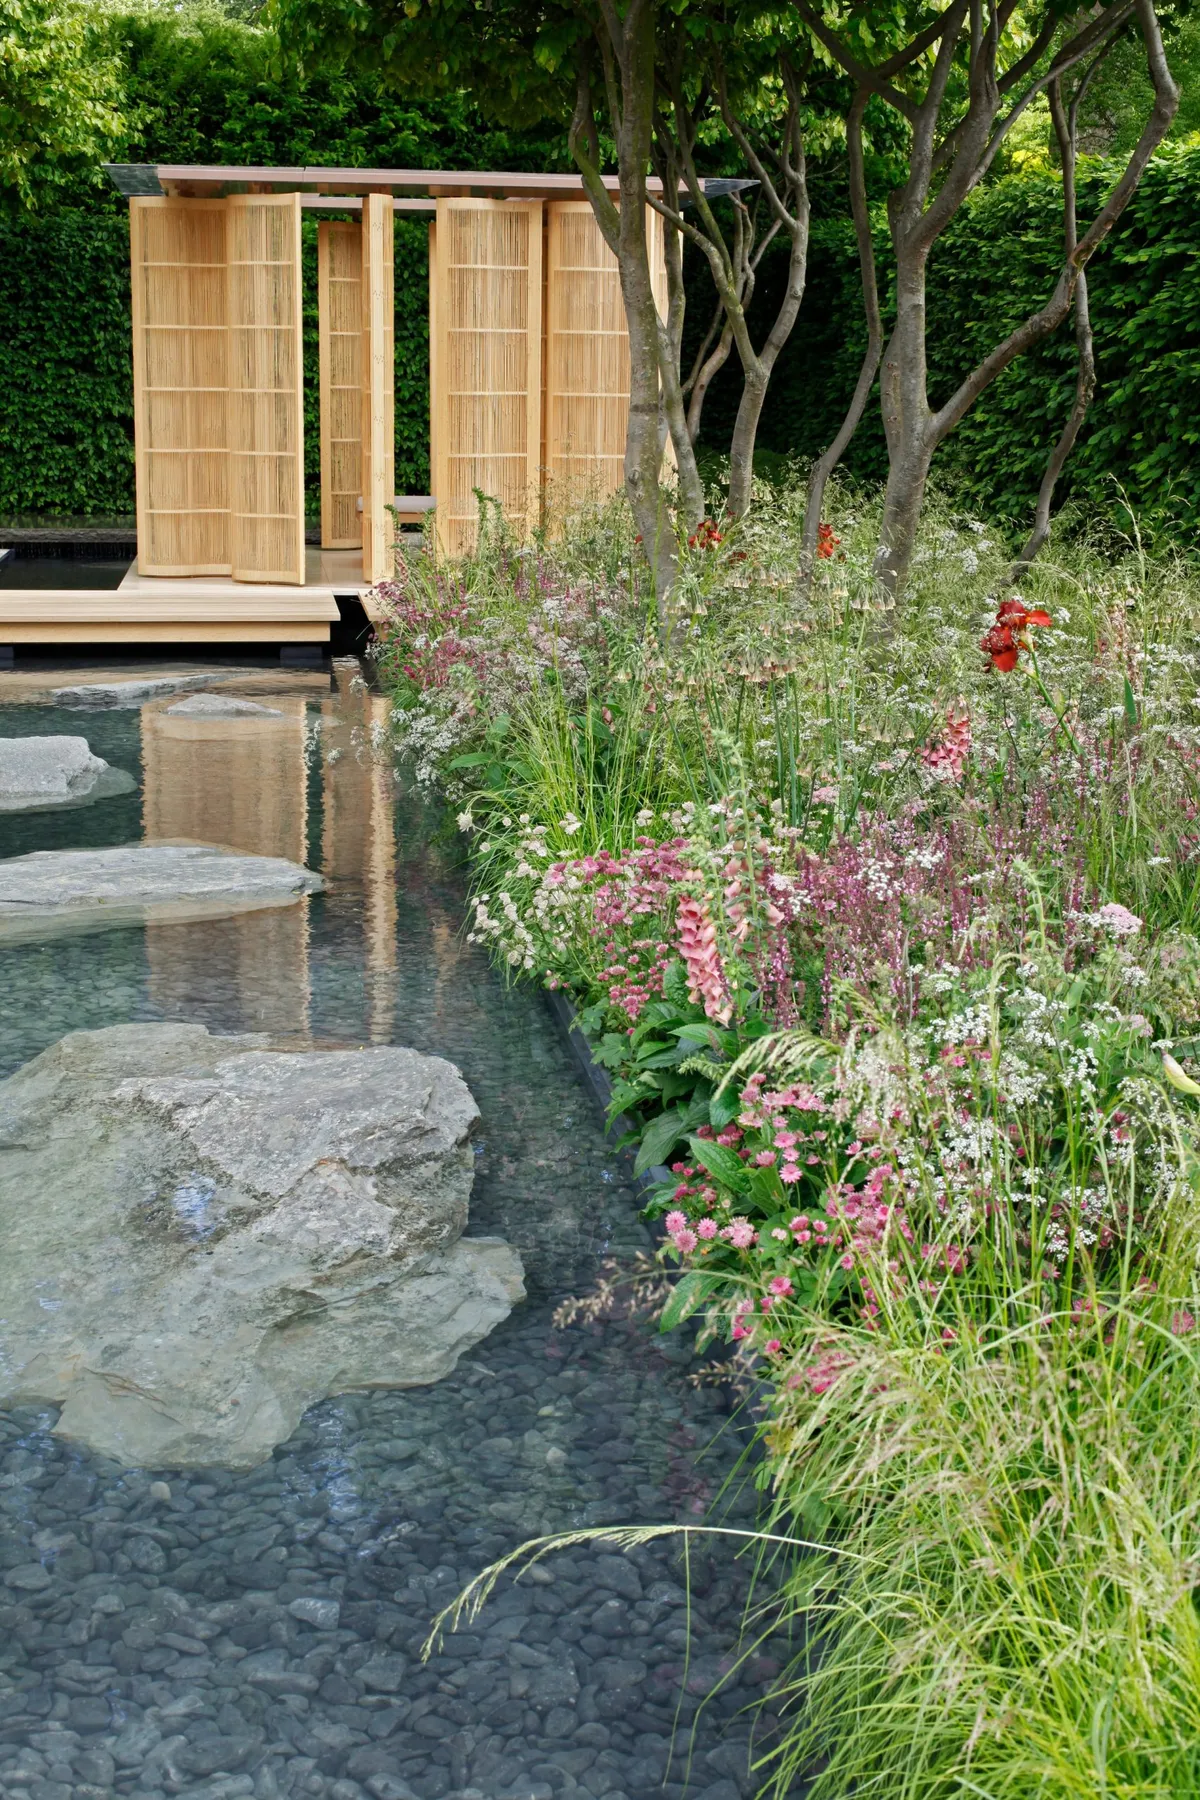 2011: Laurent-Perrier Garden - Nature & Human Intervention at RHS Chelsea Flower Show by Luciano Giubbilei